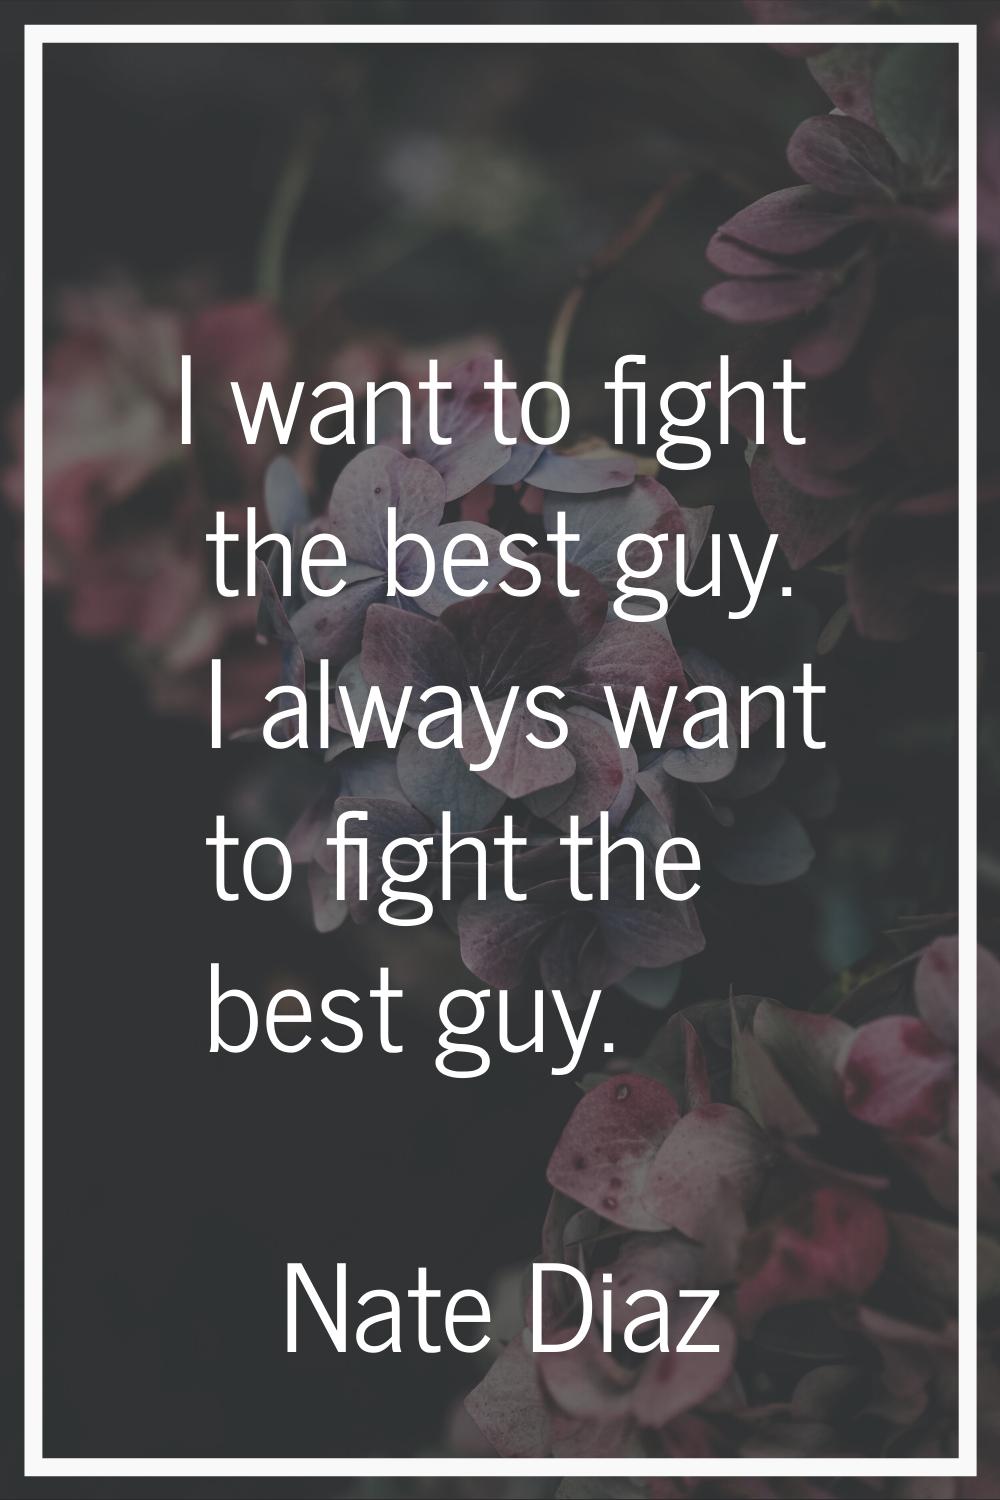 I want to fight the best guy. I always want to fight the best guy.